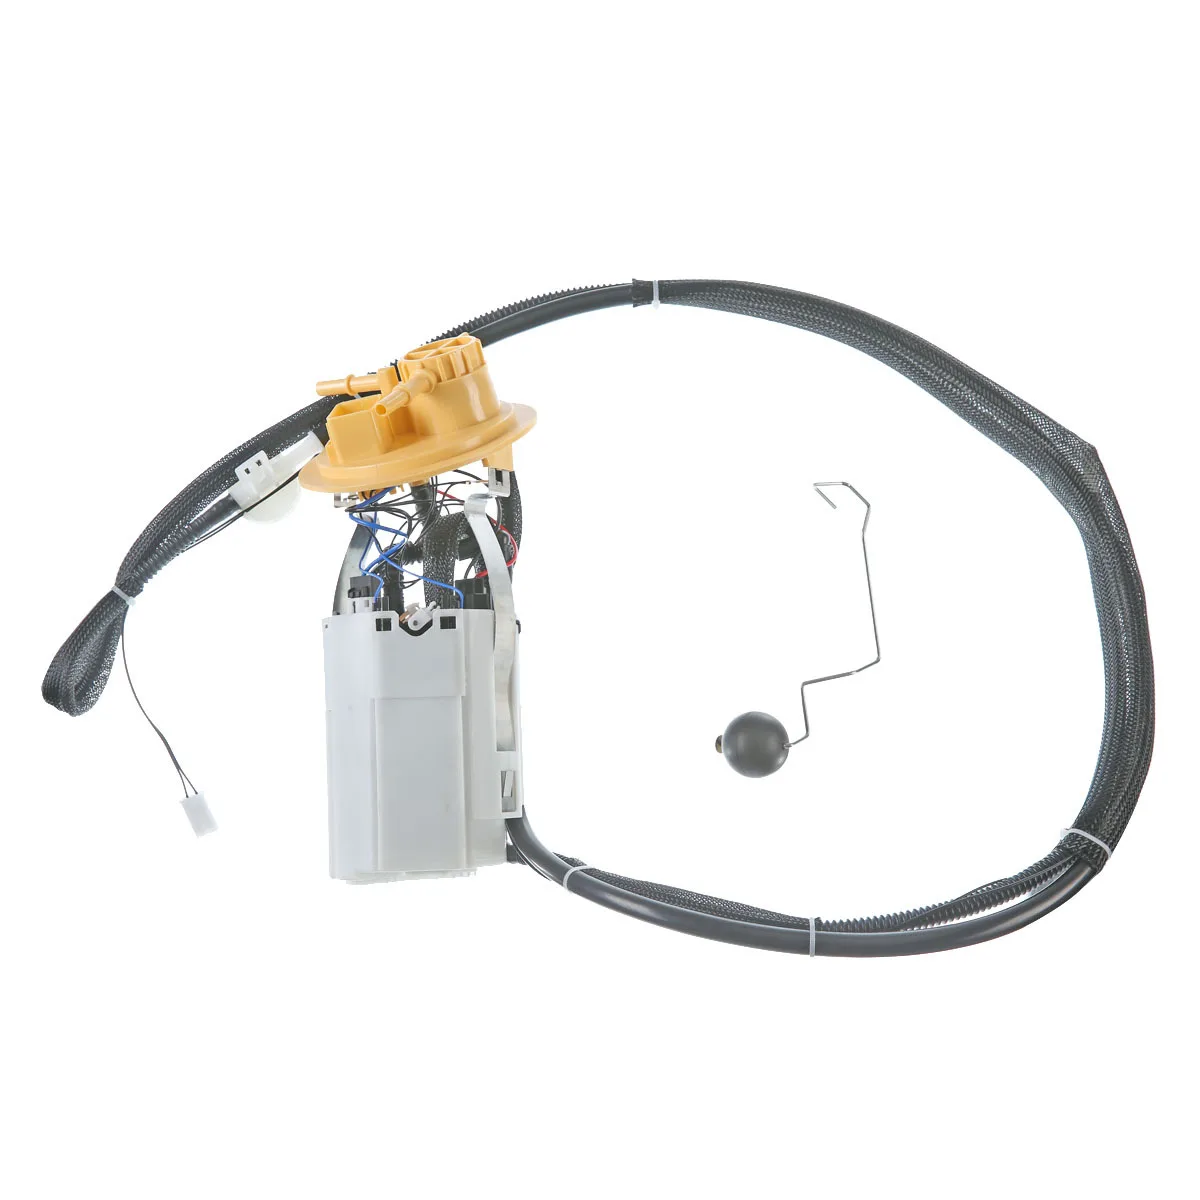 

In-stock CN US GMR Fuel Pump Module Assembly for Volvo S60 S80 V70 XC70 XC90 05-07 2.4L/2.5L/4.4L 2920697